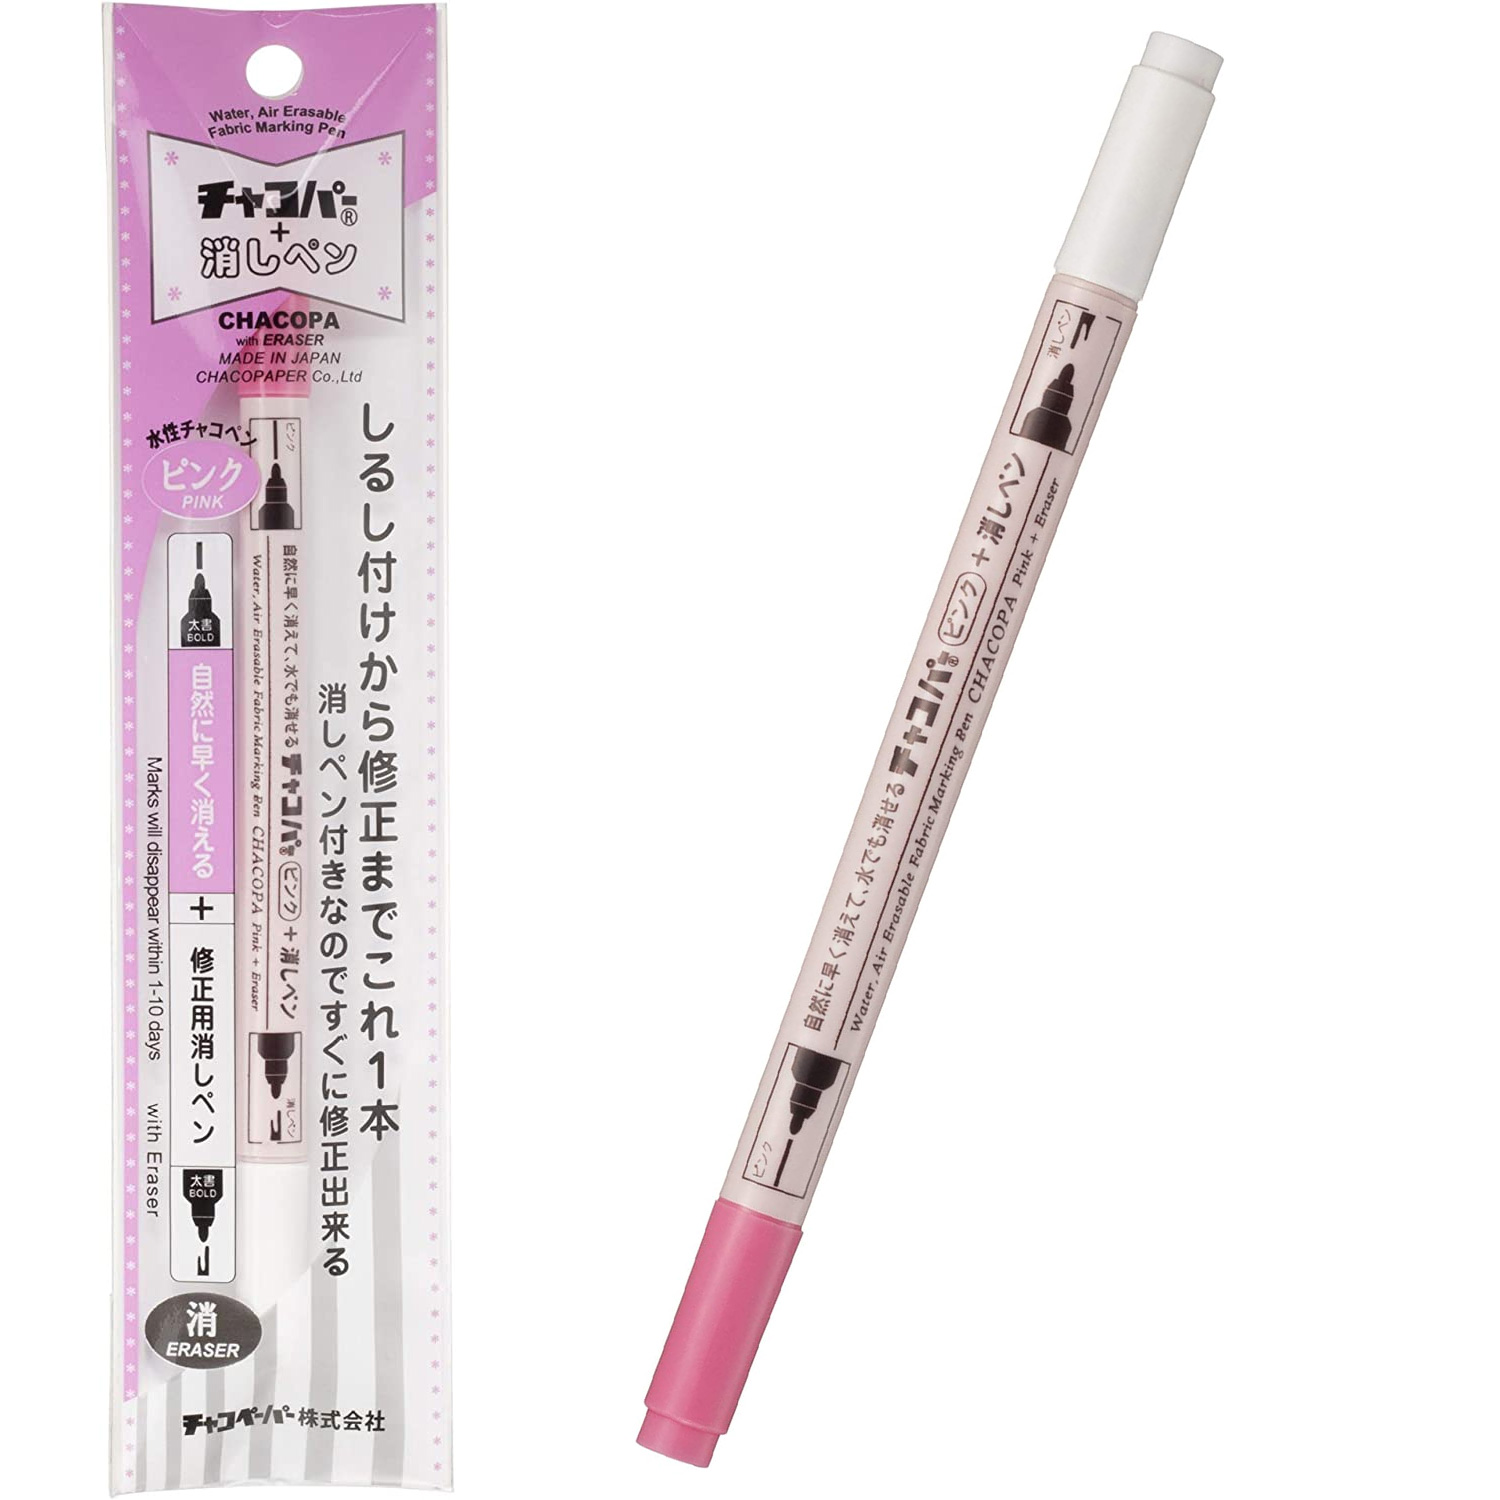 F11-PK Water-based Chaco Pen Chacopa + Eraser Pen pink"", length 14cm (pcs)